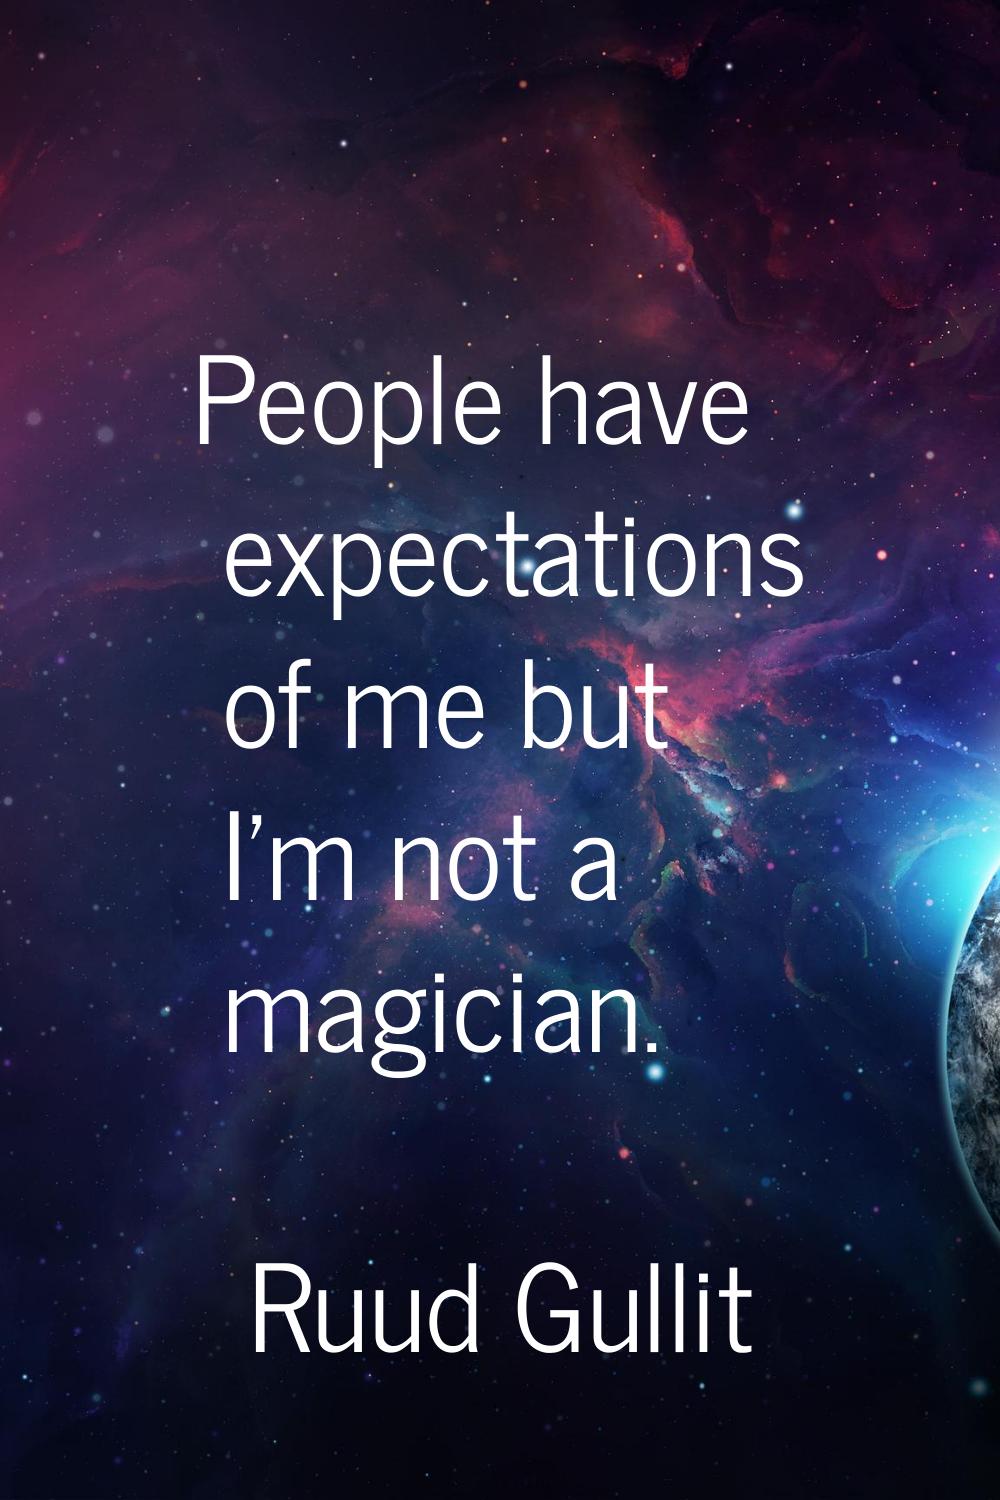 People have expectations of me but I'm not a magician.